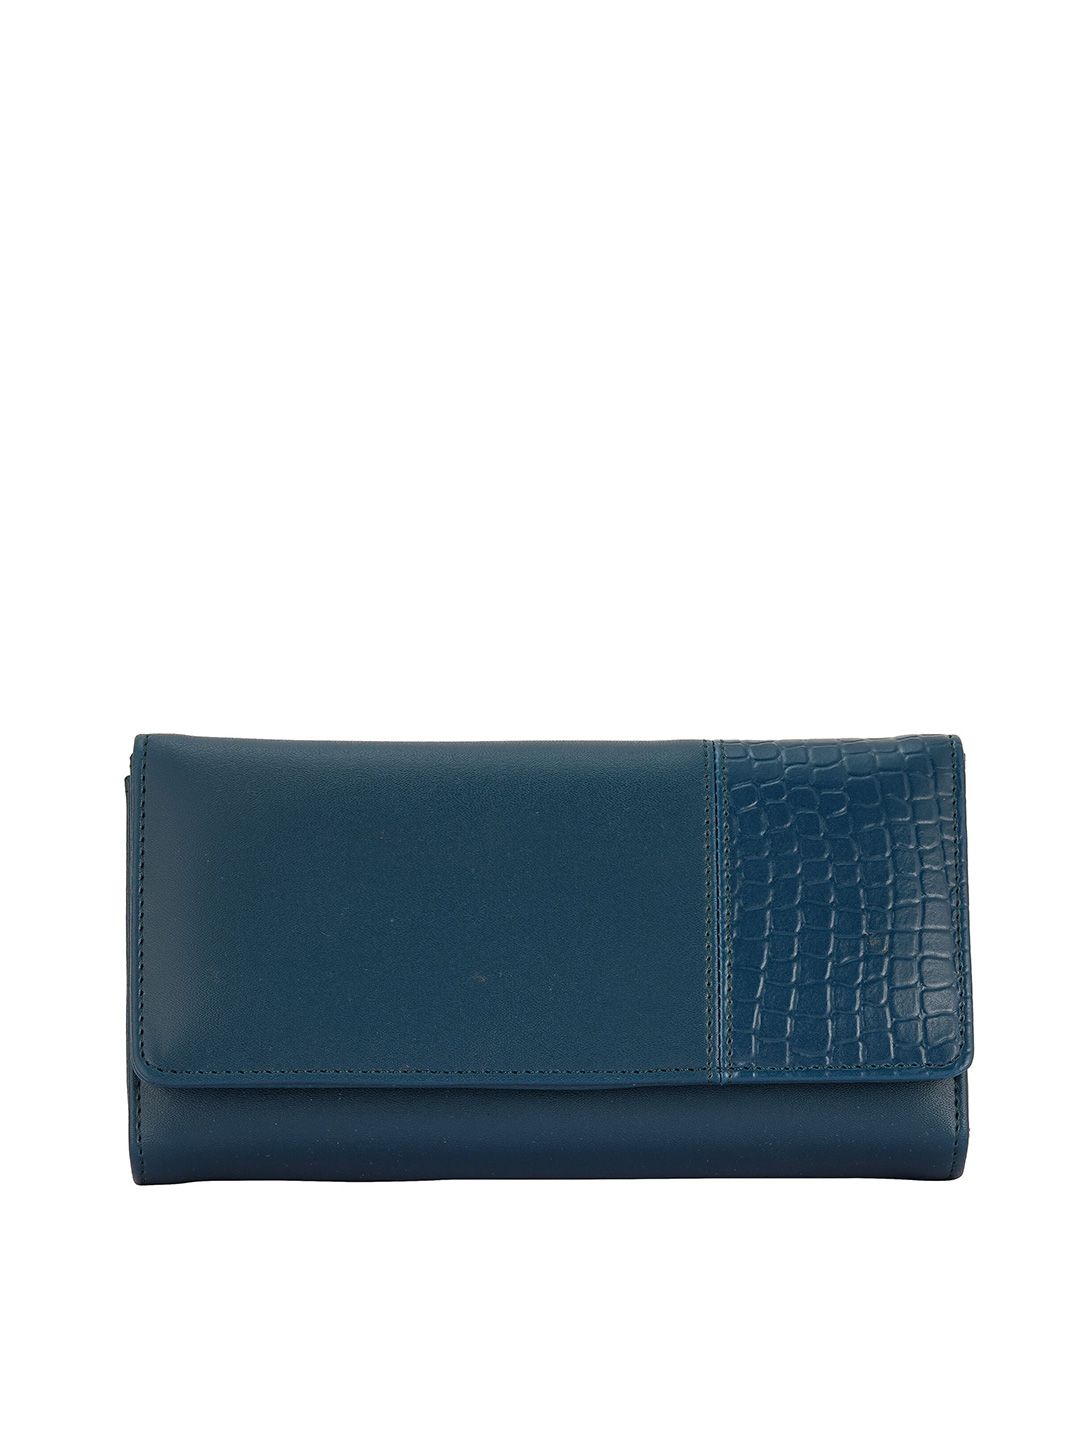 Toteteca Women Blue Textured Two Fold Wallet Price in India